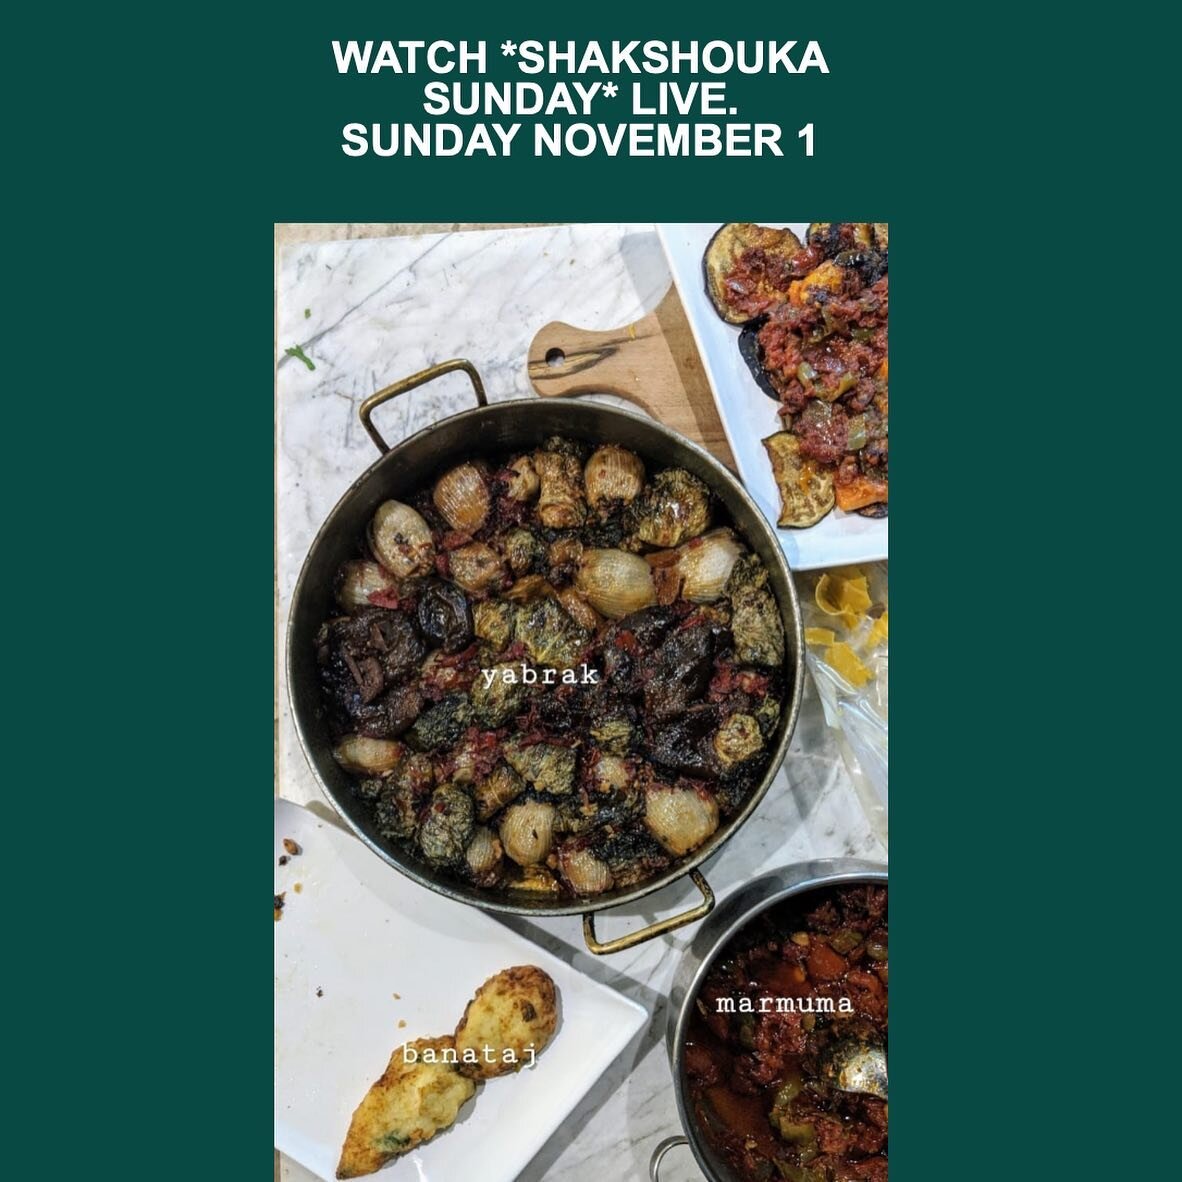 👋 Join us on IG at @dirt.dmv for this week's *LIVE* Shakshouka Sunday on
Nov 1st at 6 pm Tunis (GMT+1) / 9 am PST / 12 EST
~
Our co-founding editor Ikram Lakhdhar (@lalaik) and Tunis-based artist and food researcher Rafram Chaddad (@Rafram_x) will p